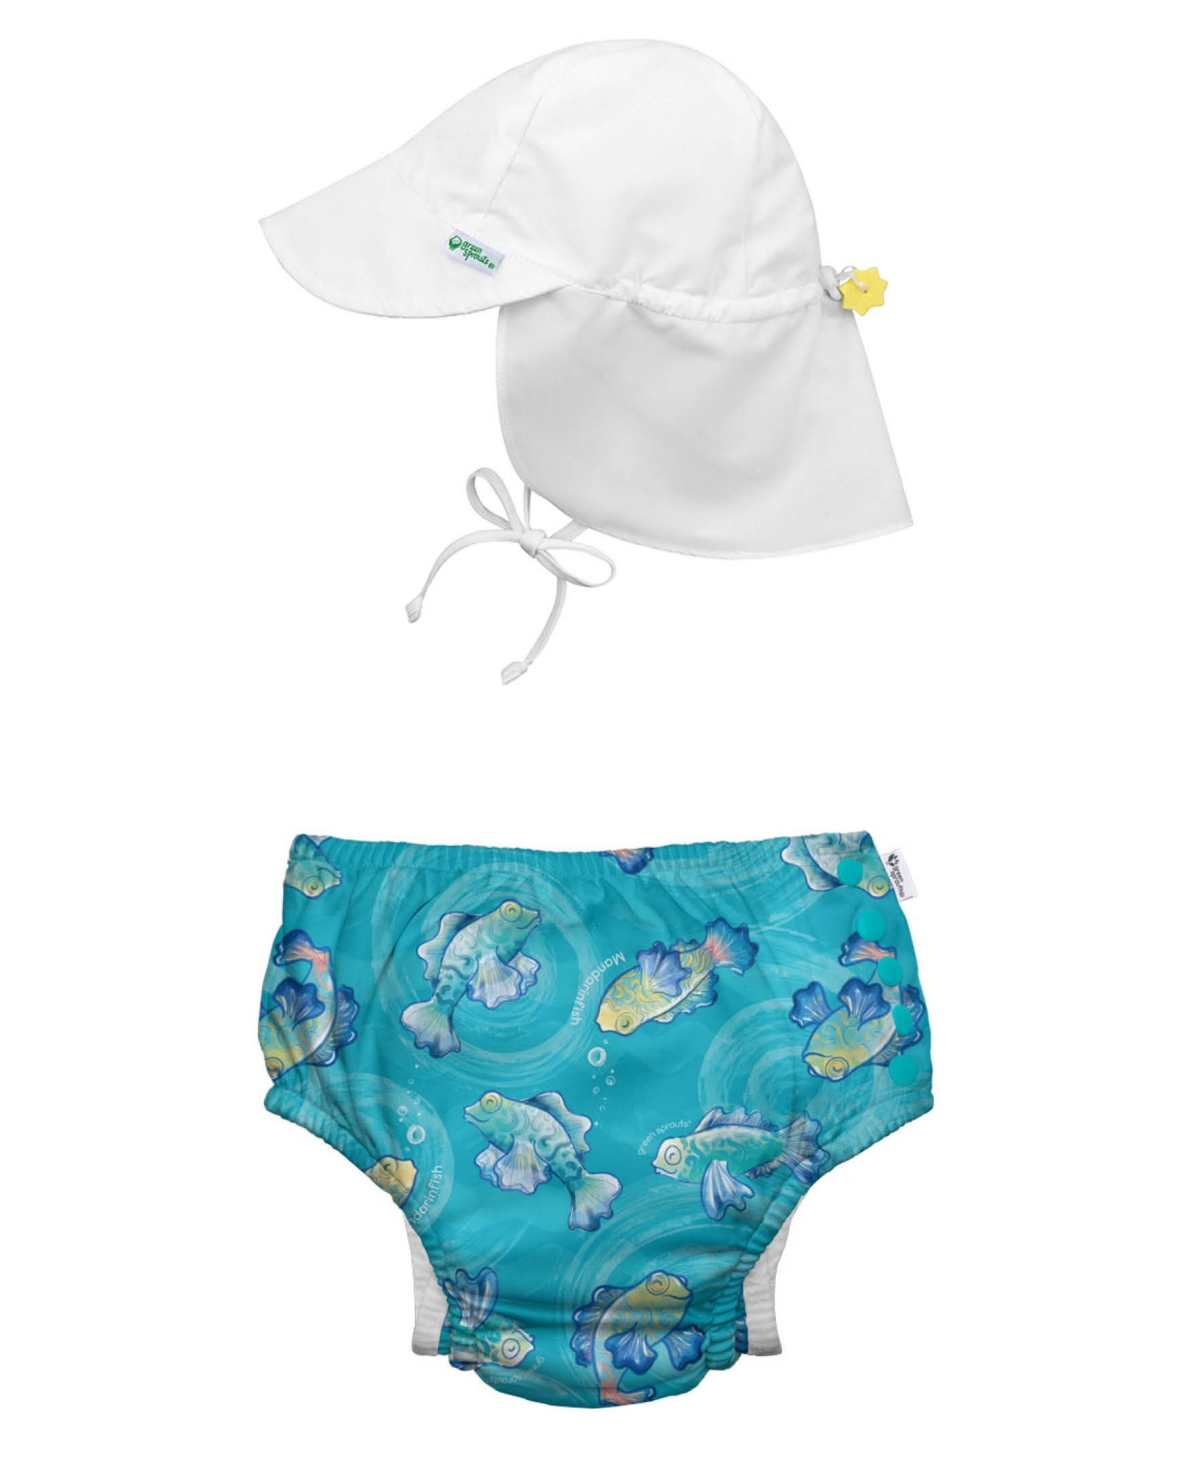 Green Sprouts Baby Boys Or Baby Girls Snap Swim Diaper And Flap Hat Upf 50, 2 Piece Set In Aqua Mandarin Fish